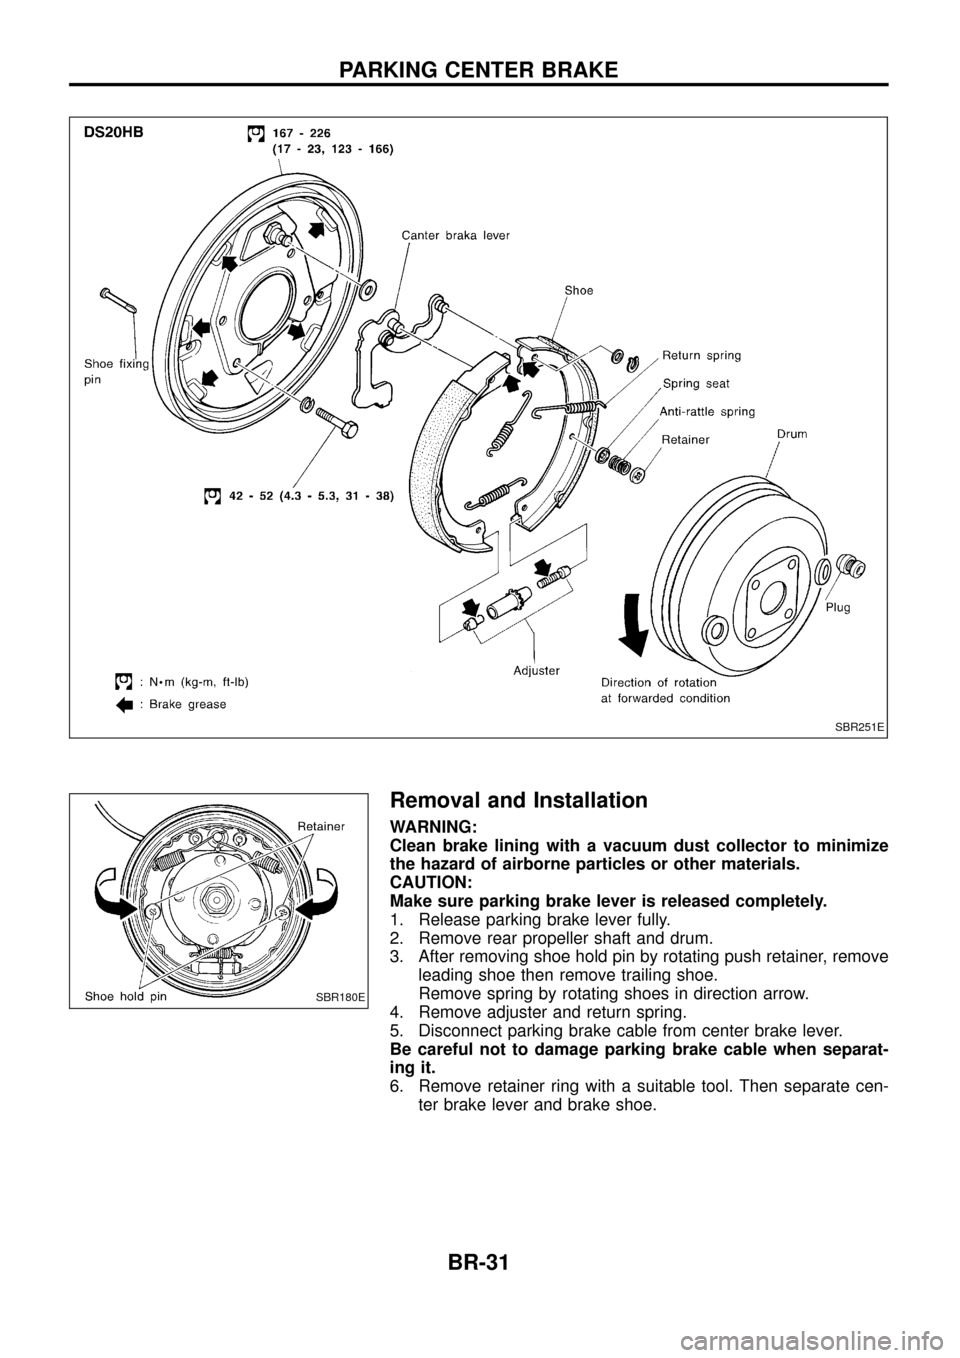 NISSAN PATROL 1998 Y61 / 5.G Brake System Owners Guide Removal and Installation
WARNING:
Clean brake lining with a vacuum dust collector to minimize
the hazard of airborne particles or other materials.
CAUTION:
Make sure parking brake lever is released co